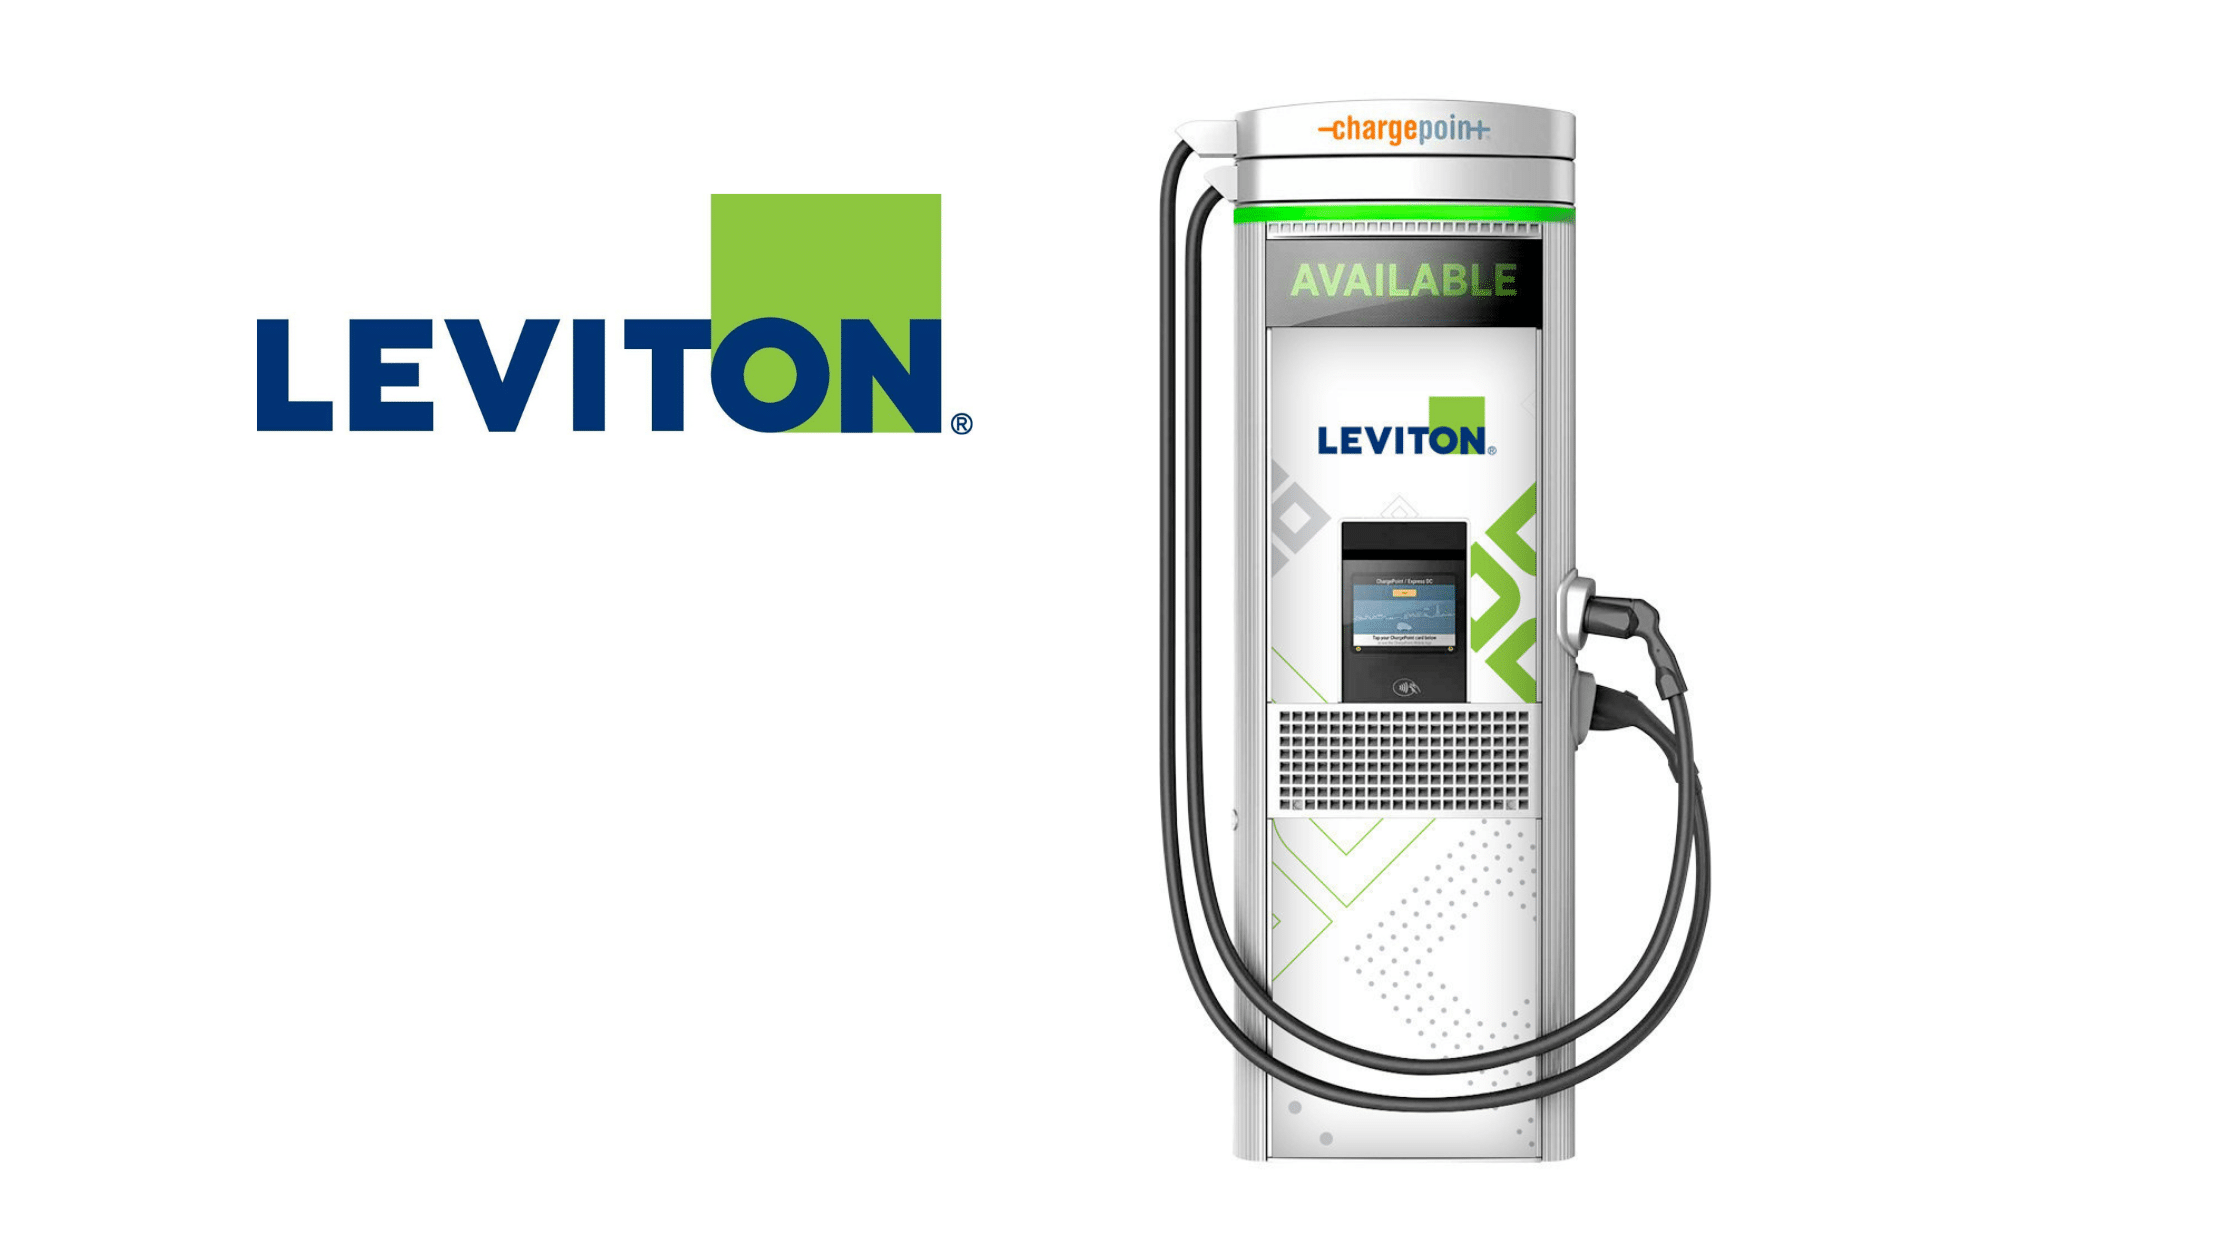 Leviton Introduces New Smart Evr-Green Electric Vehicle Charging Station for Fast, DC Charging